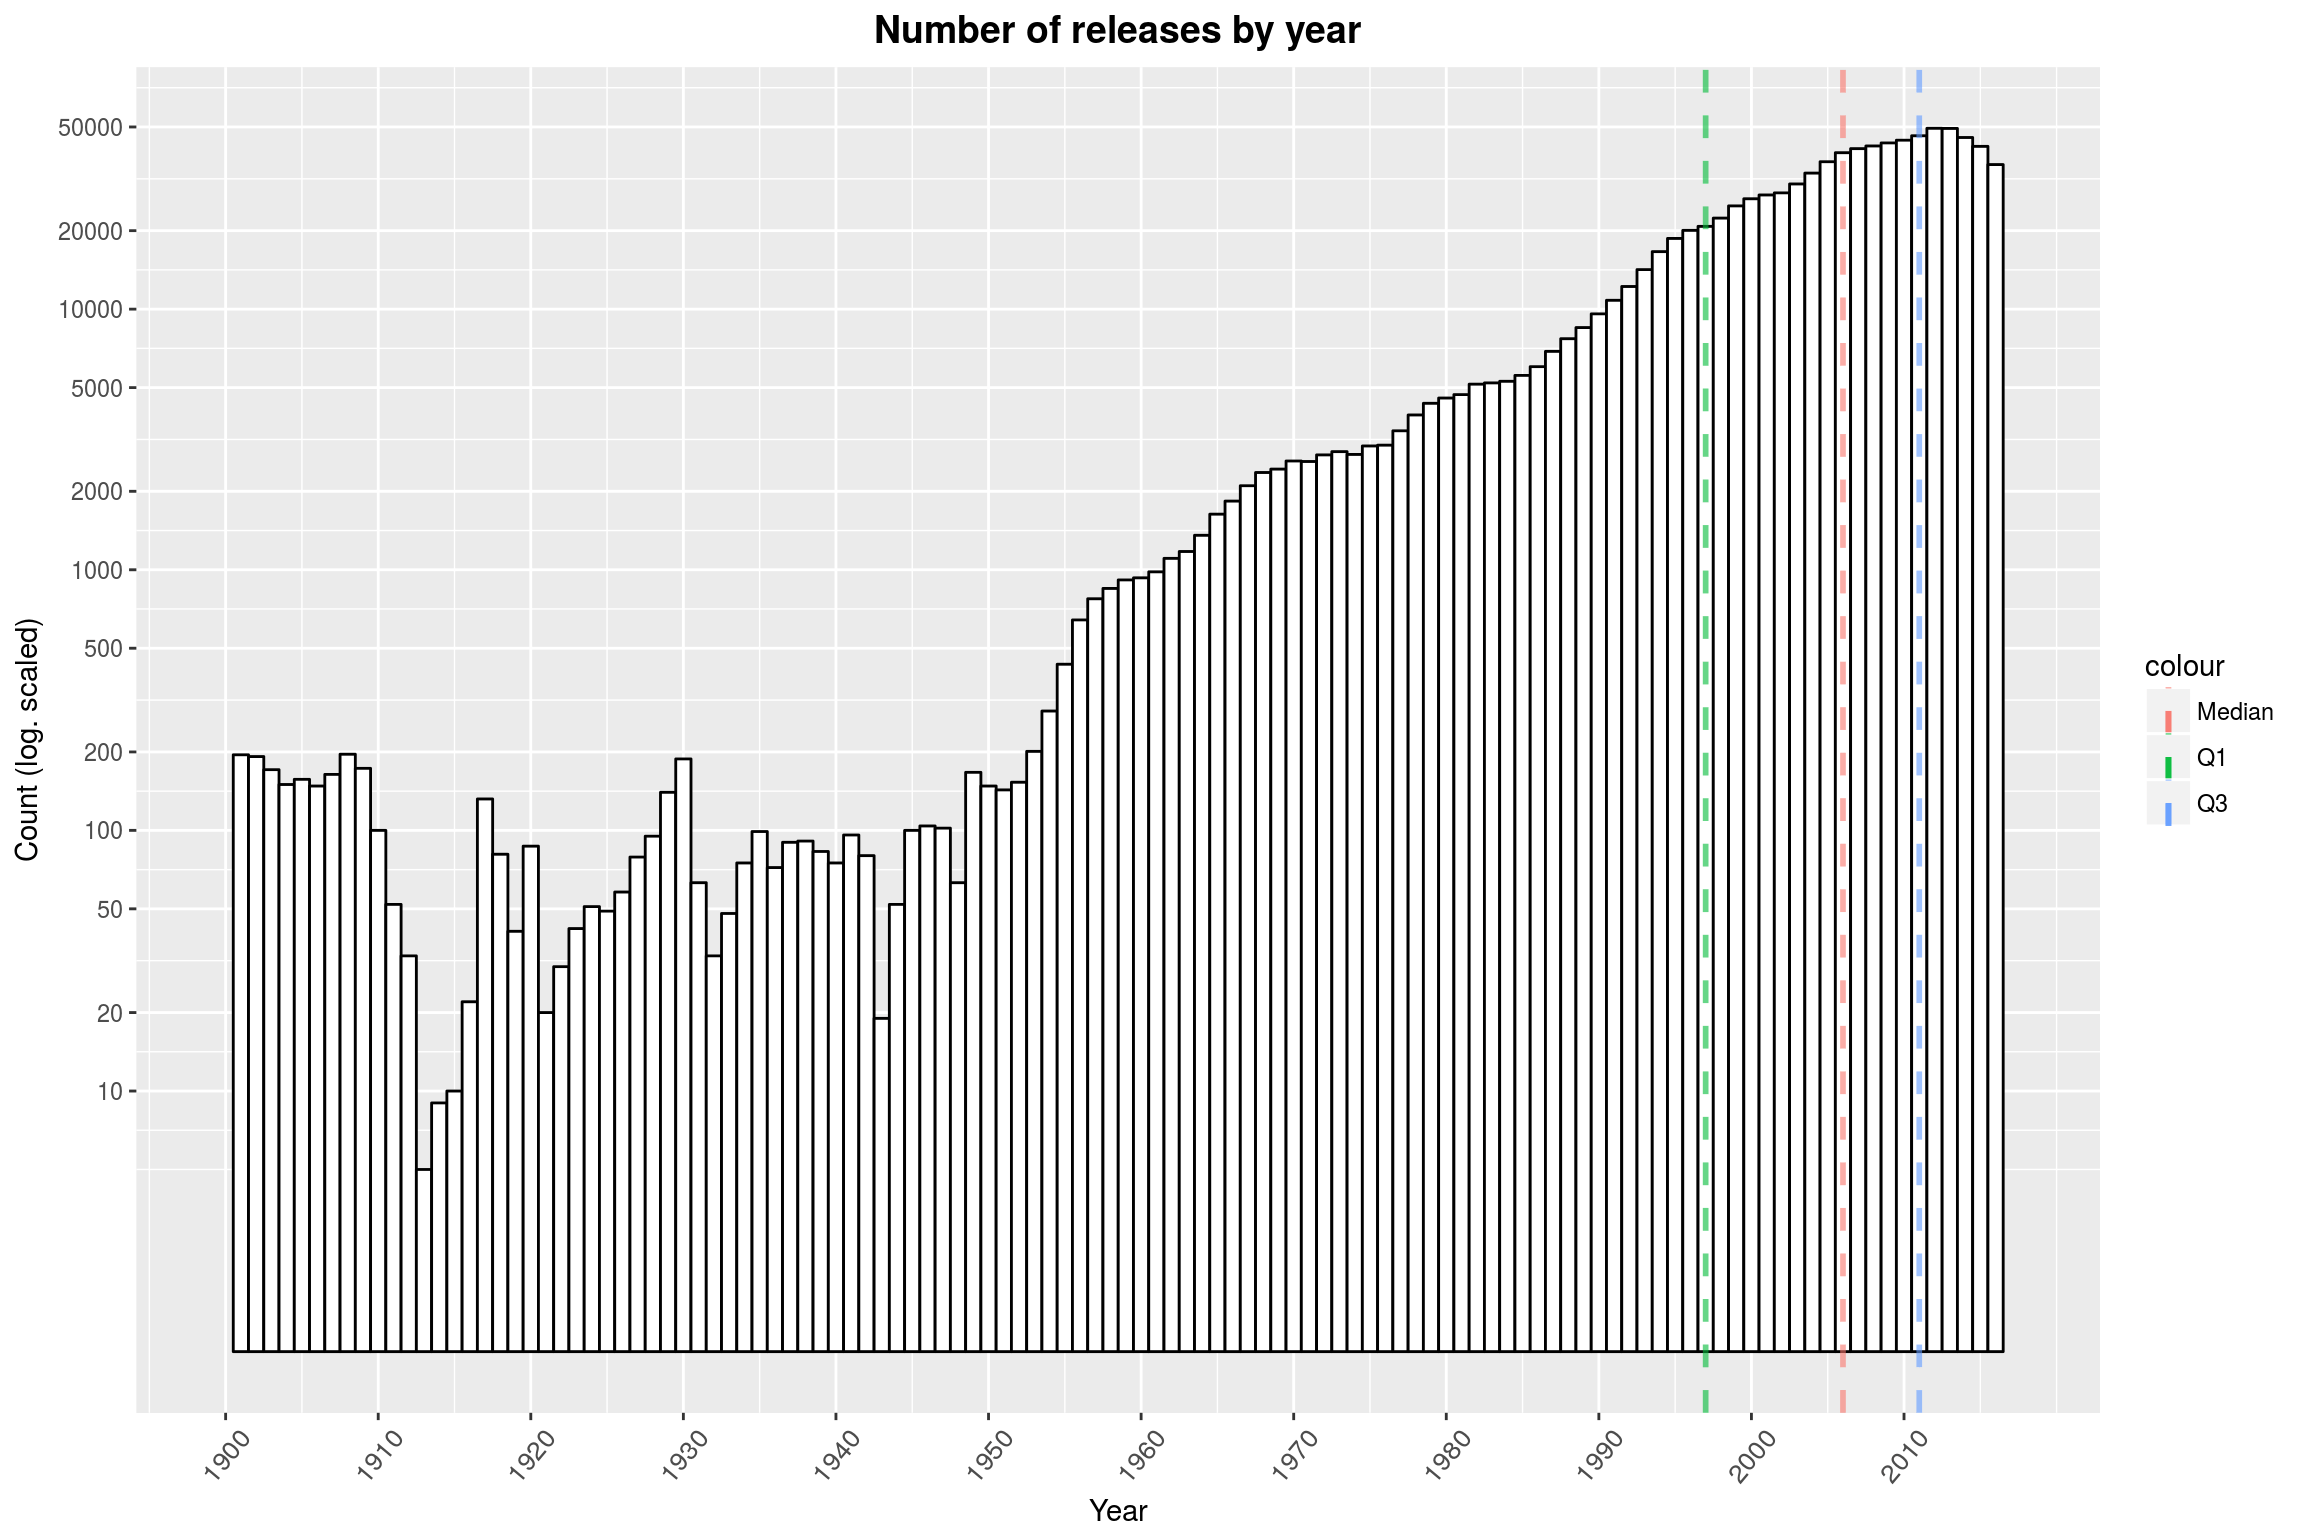 Number of release by year